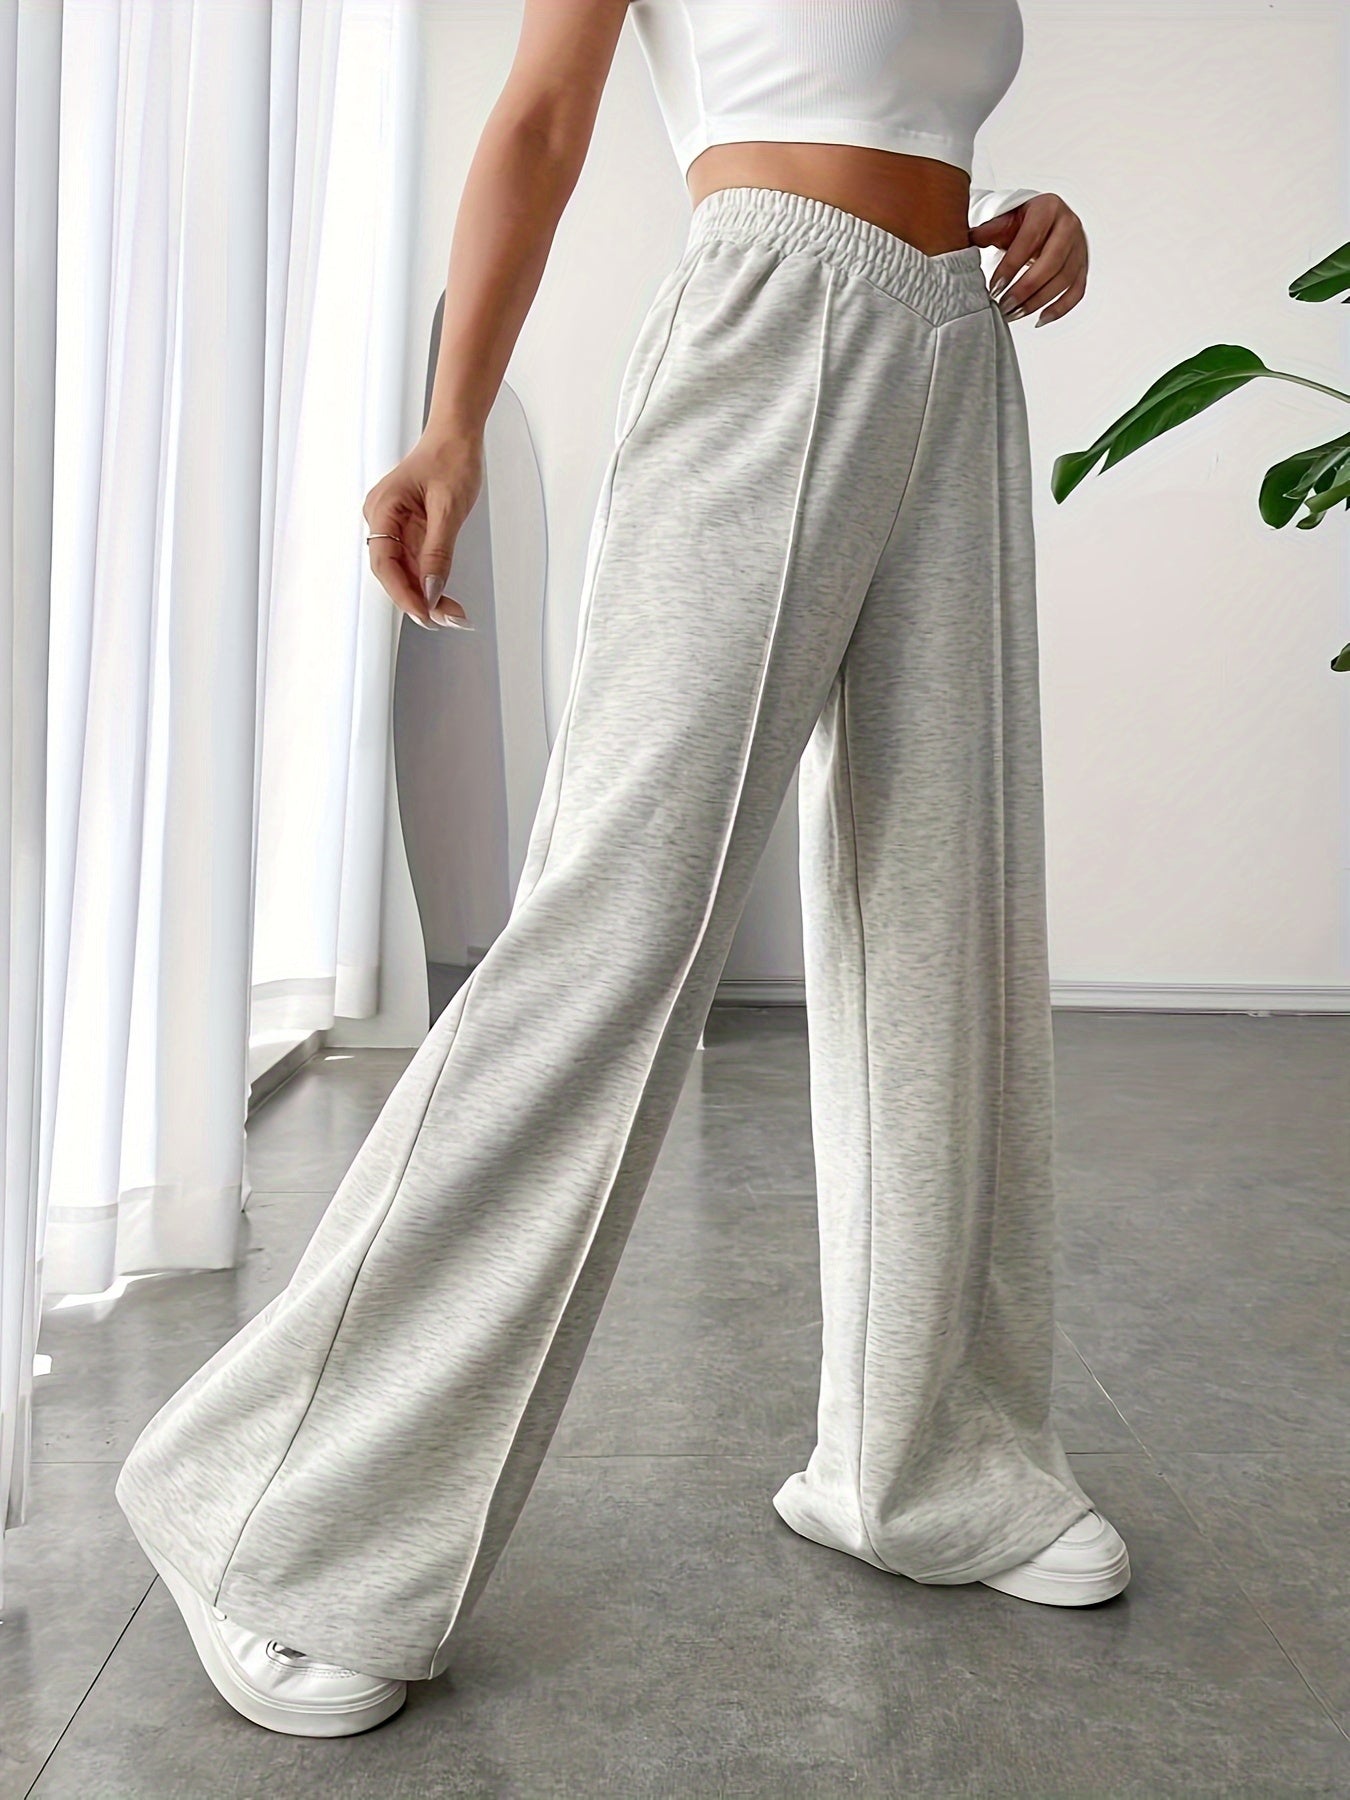 Plus Size Sports Pants, Women's Plus Solid Stitching V-Elastic High Rise Slight Stretch Wide Leg Trousers